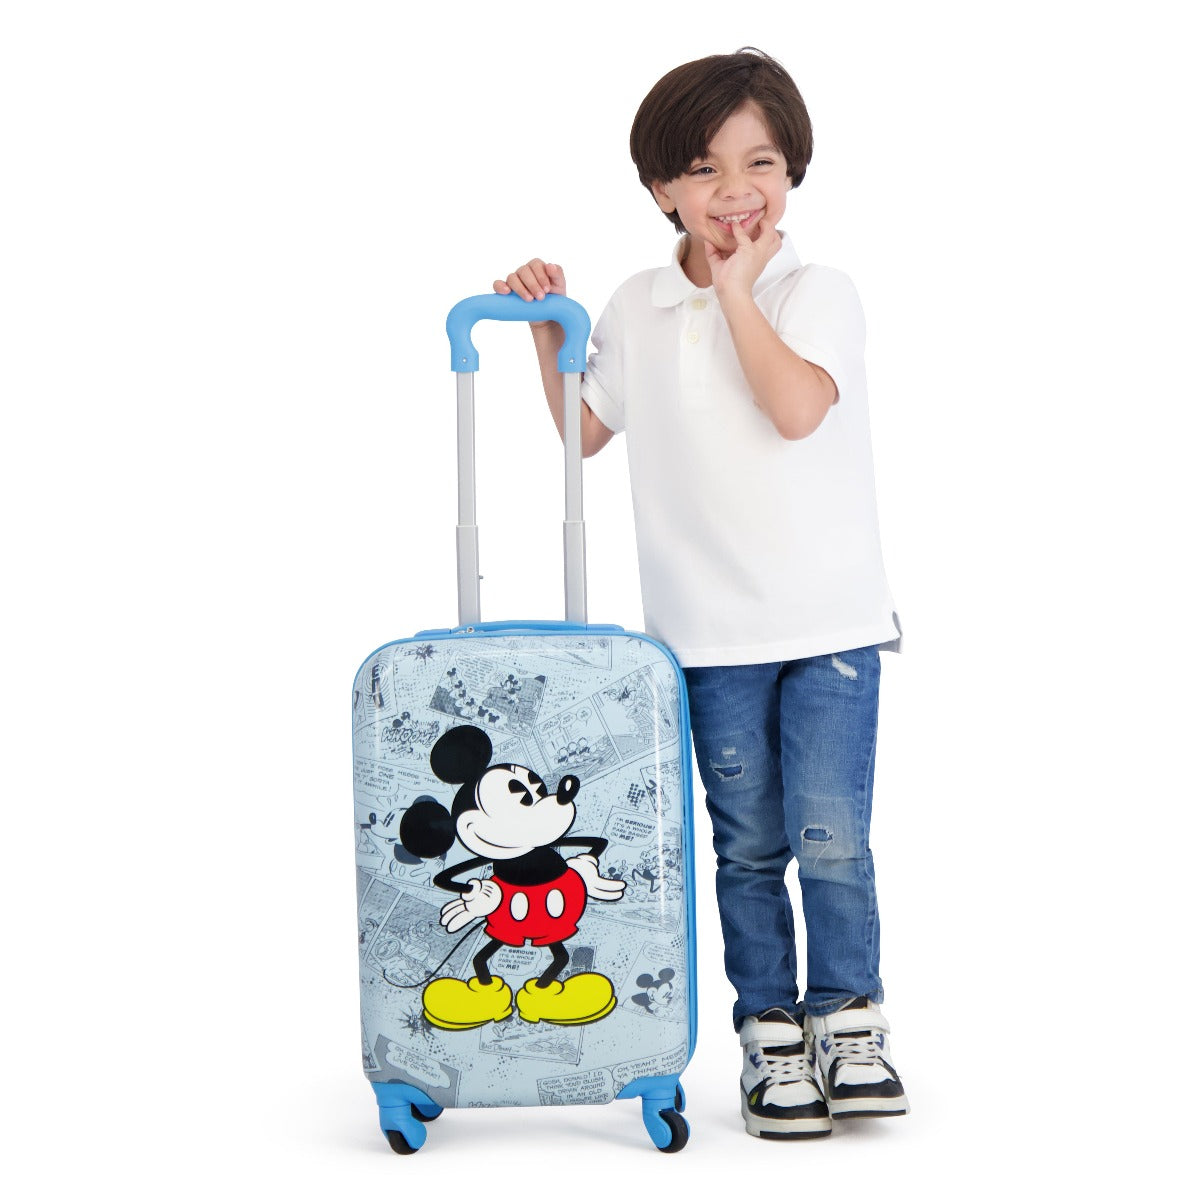 Blue Disney Ful Heritage Mickey Mouse 21" suitcase - best carry-on luggage for traveling kids